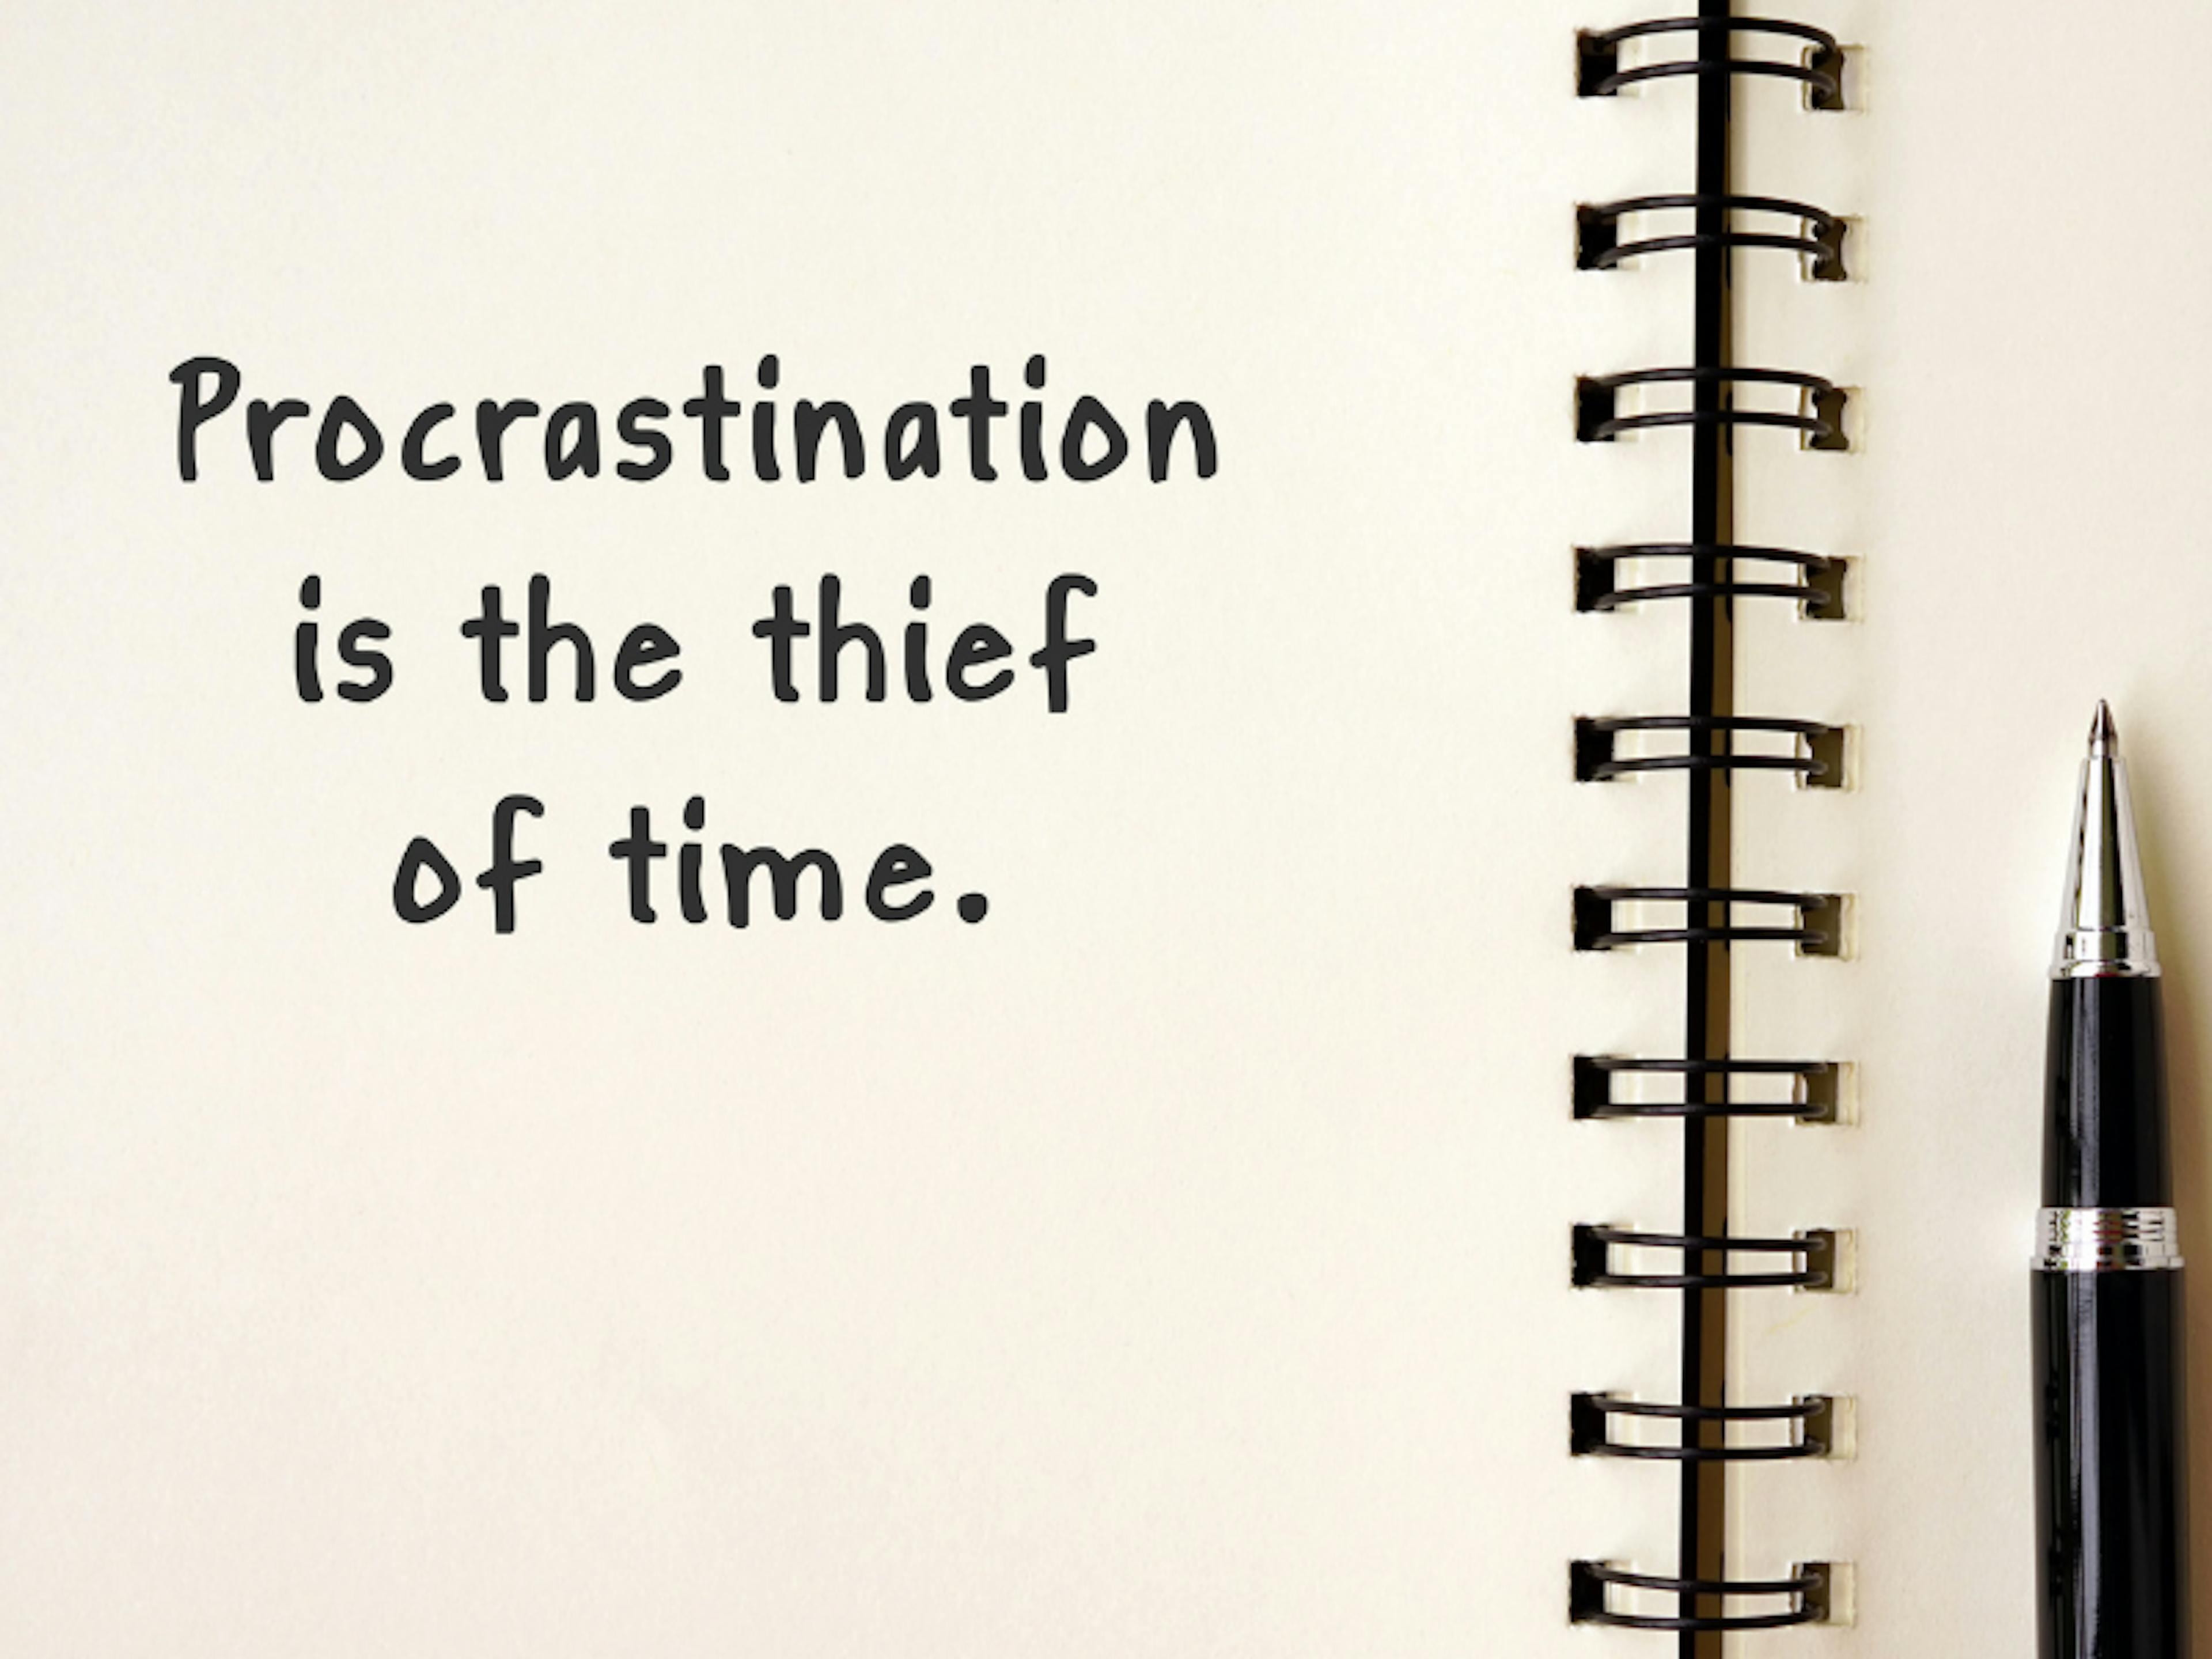 Procastination is the thief of time